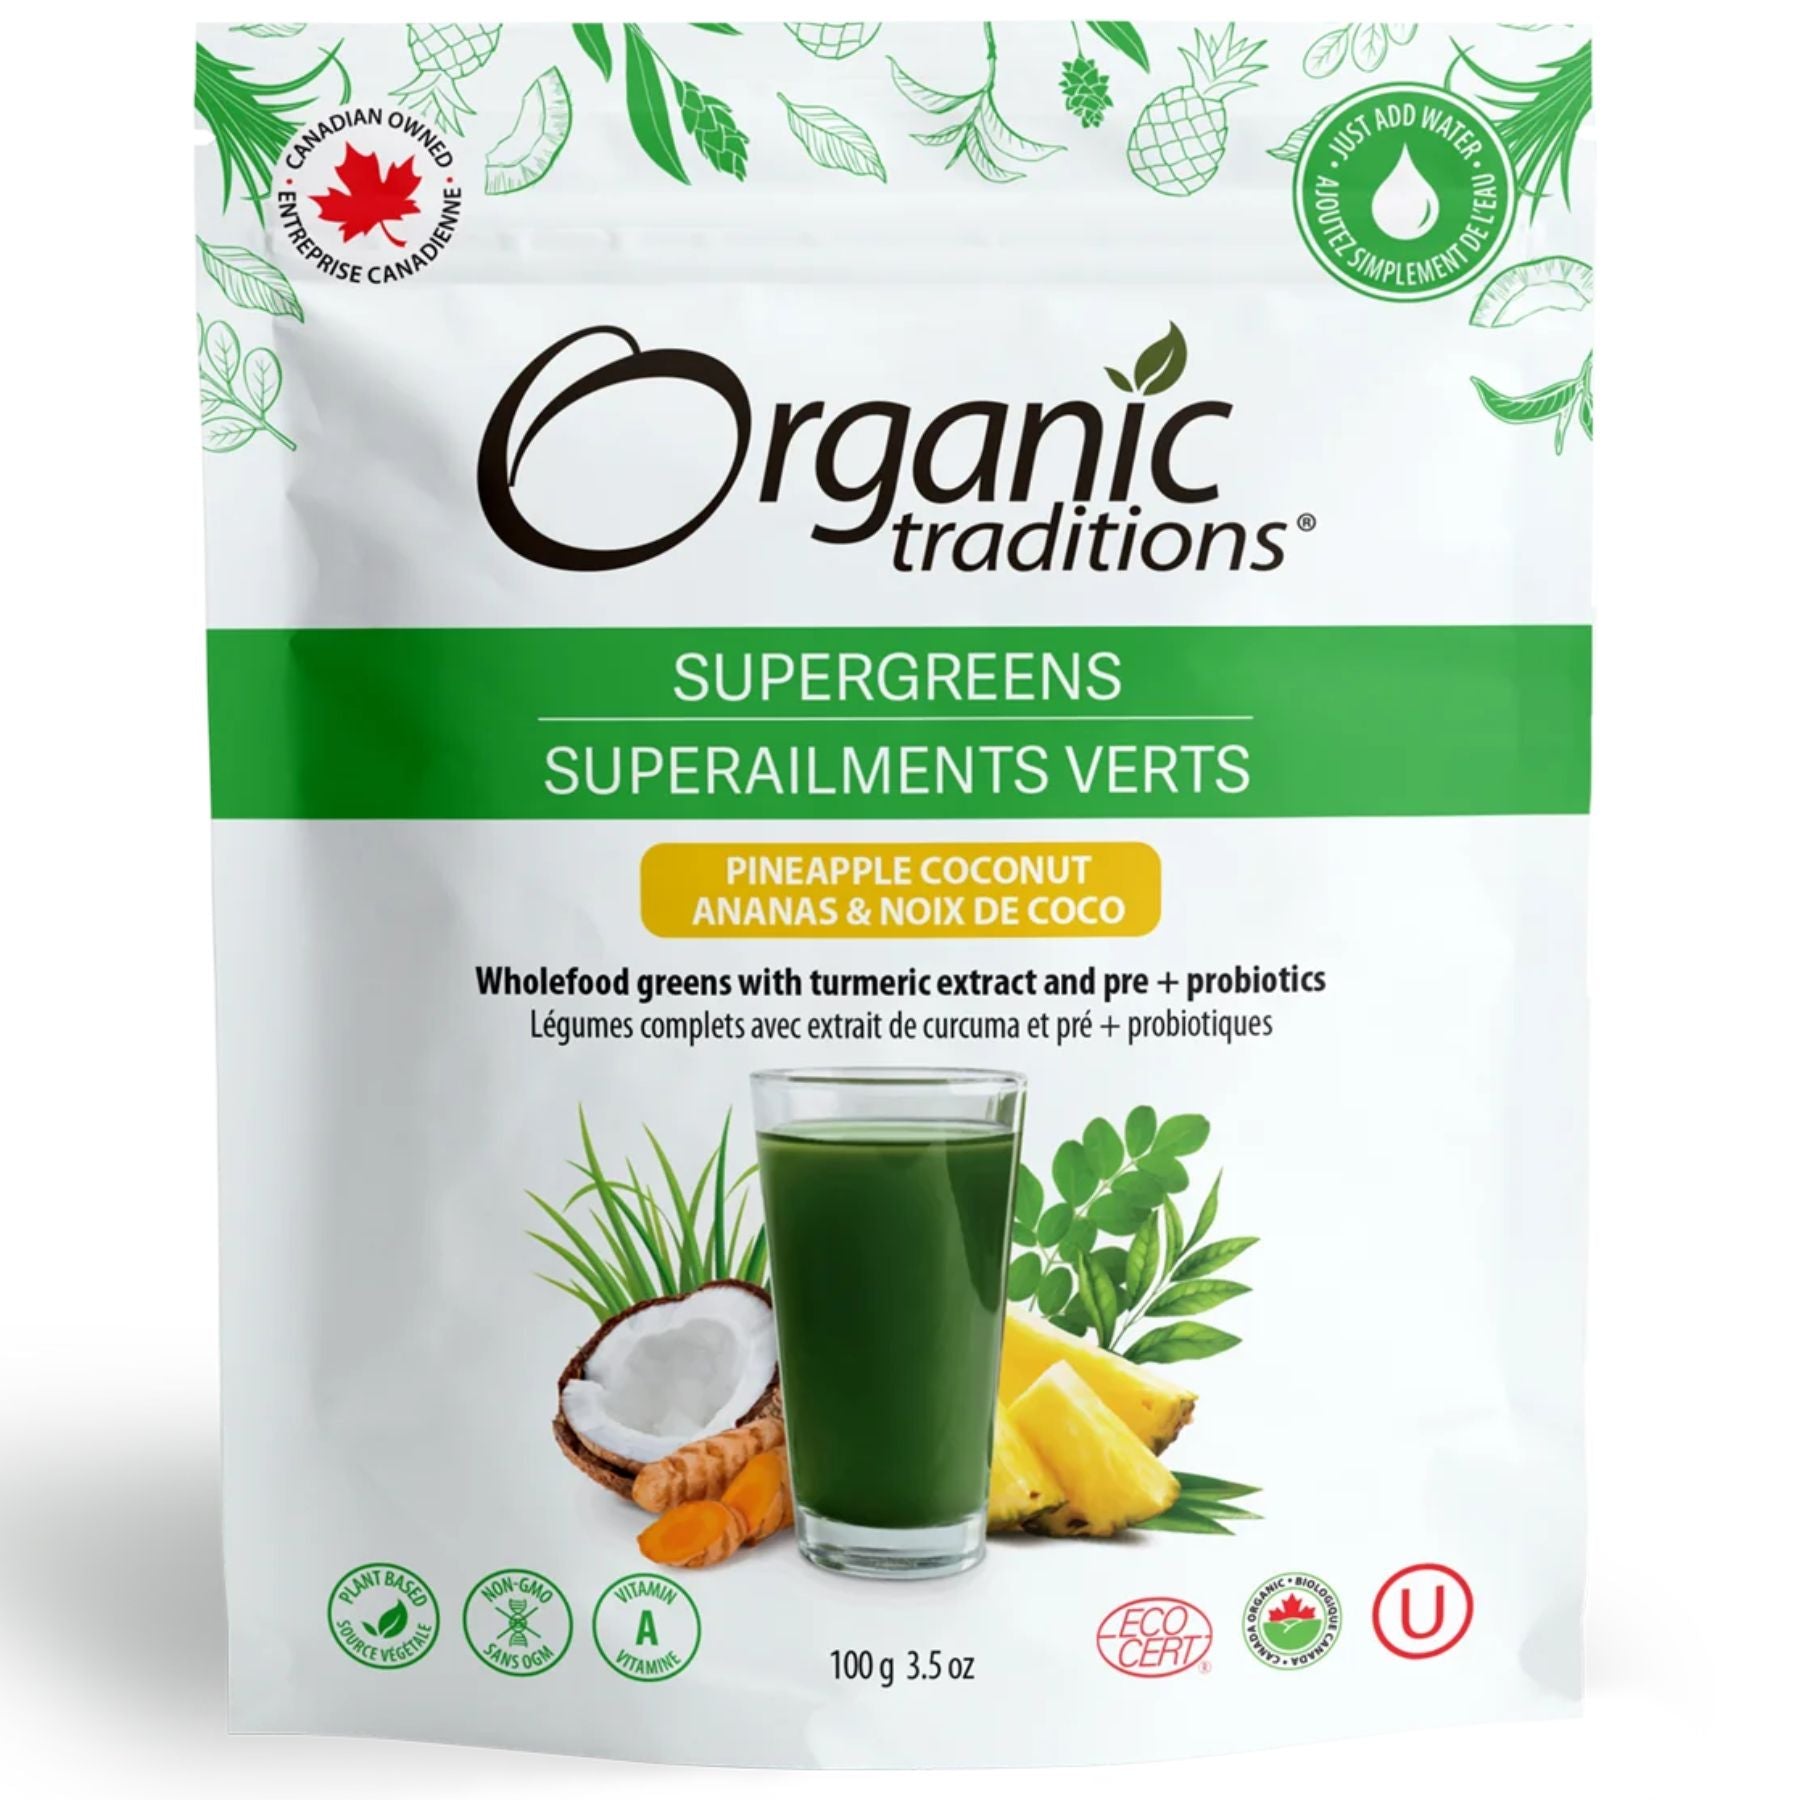 Organic Traditions Supergreens Pineapple Coconut 100g